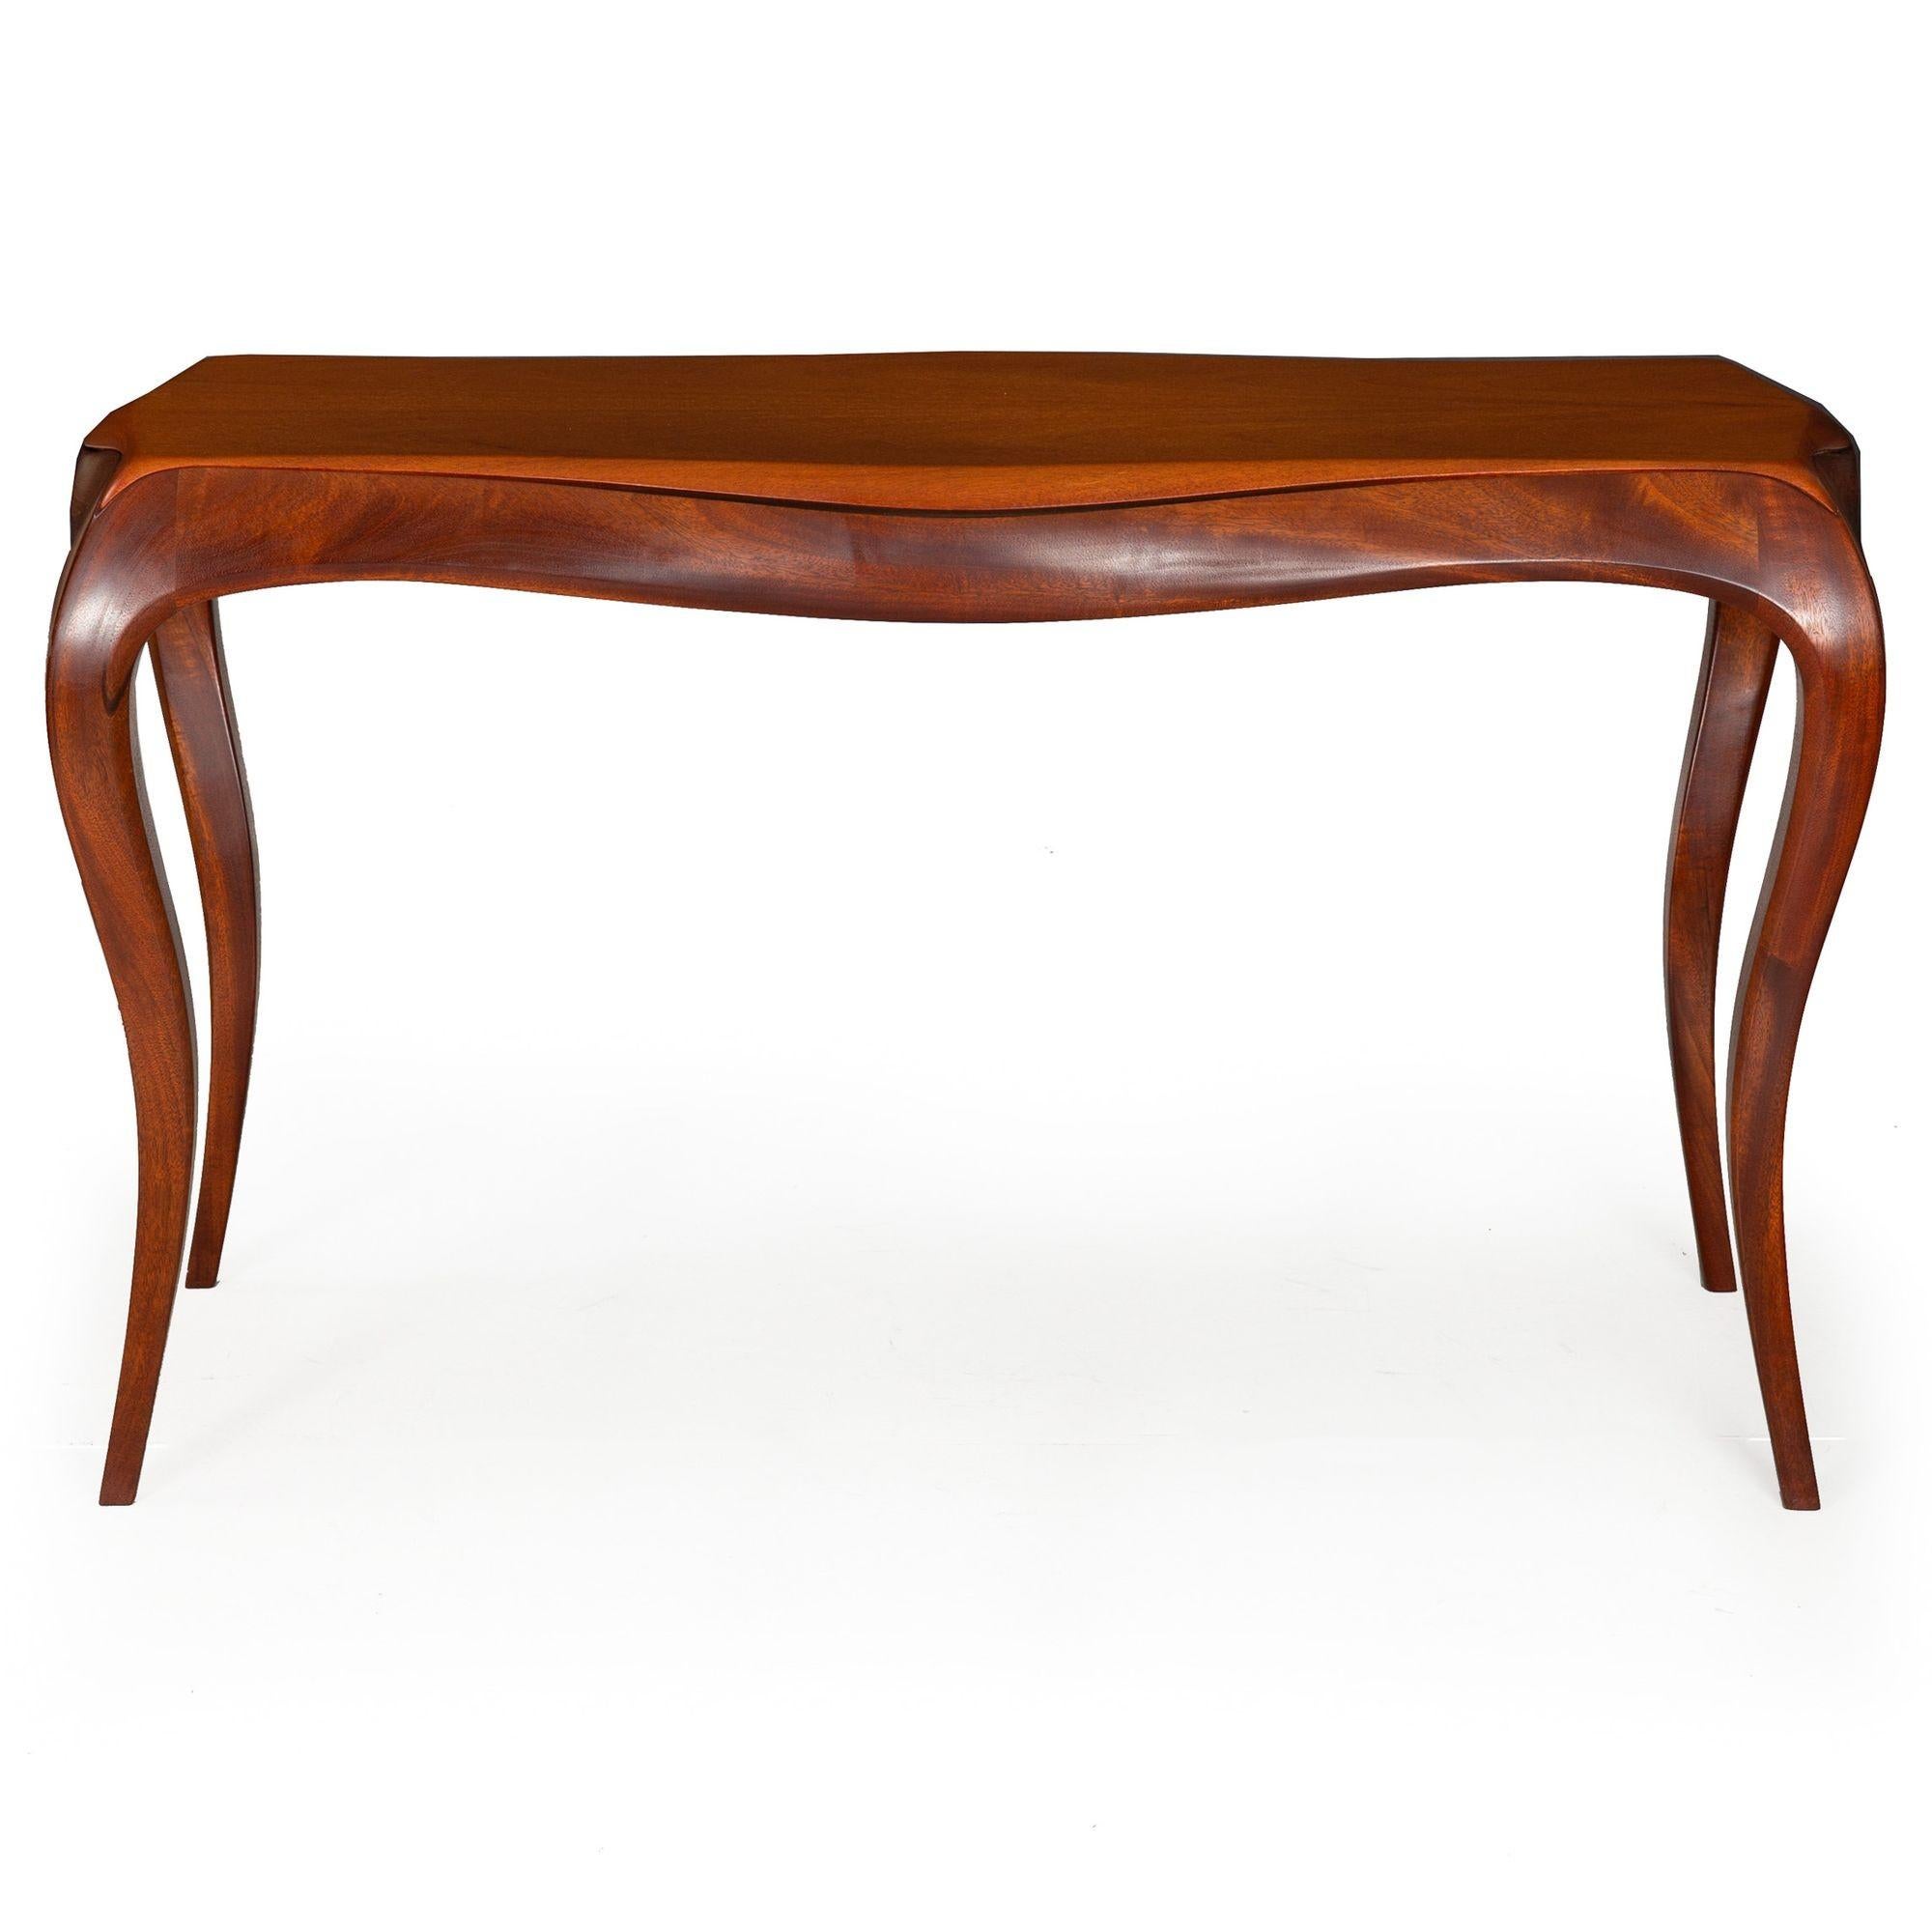 MODERNIST MAHOGANY SERPENTINE CONSOLE TABLE
Two available  probably late 20th century  carved initials to the underside 